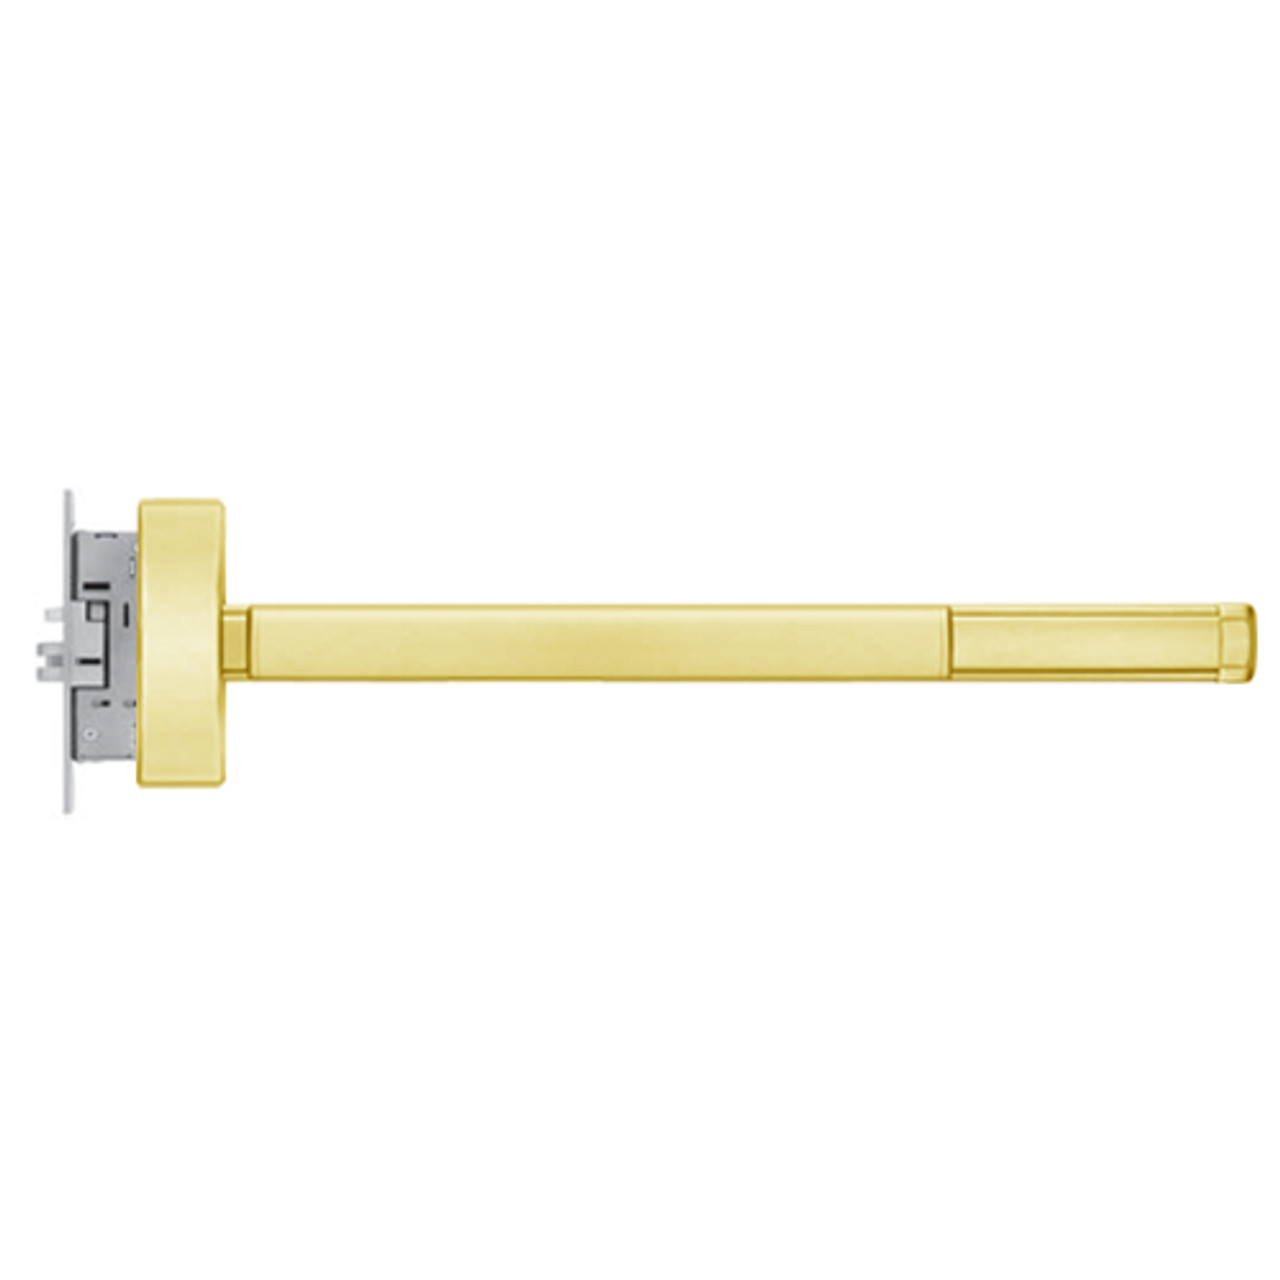 MLR2302-RHR-605-36 PHI 2300 Series Apex Mortise Exit Device with Motorized Latch Retraction Prepped for Dummy Trim in Bright Brass Finish